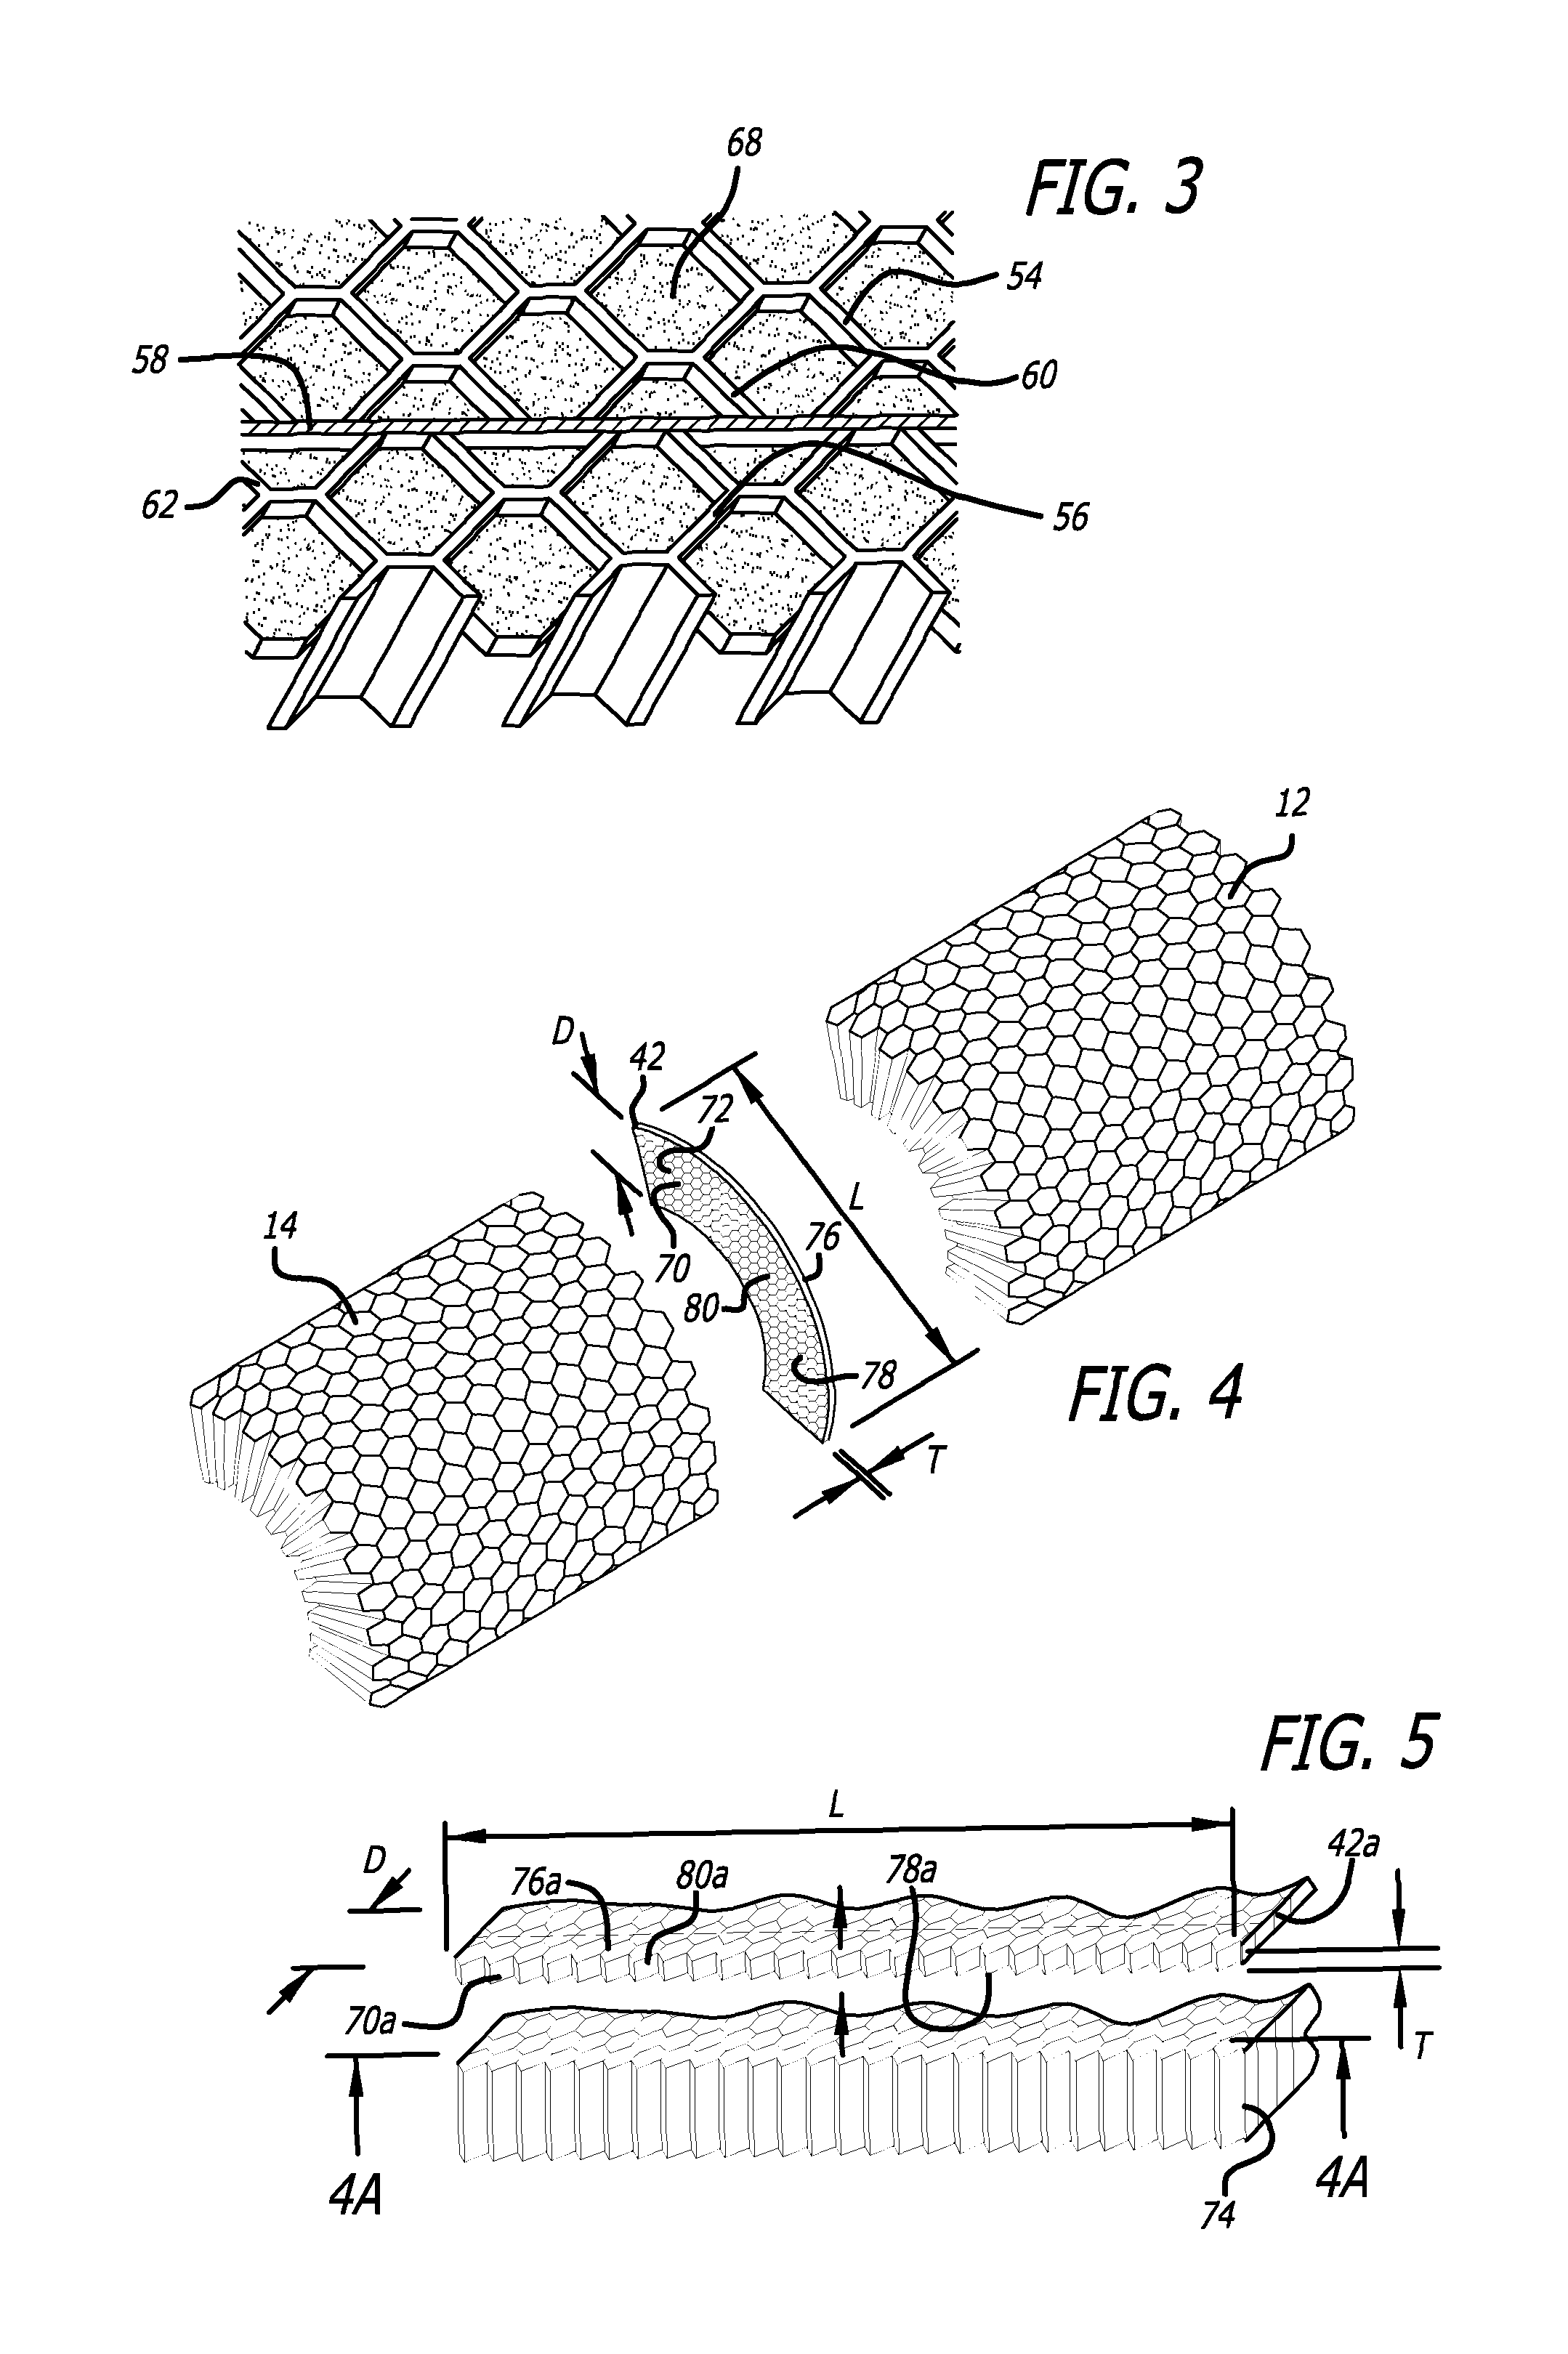 Splicing of curved acoustic honeycomb